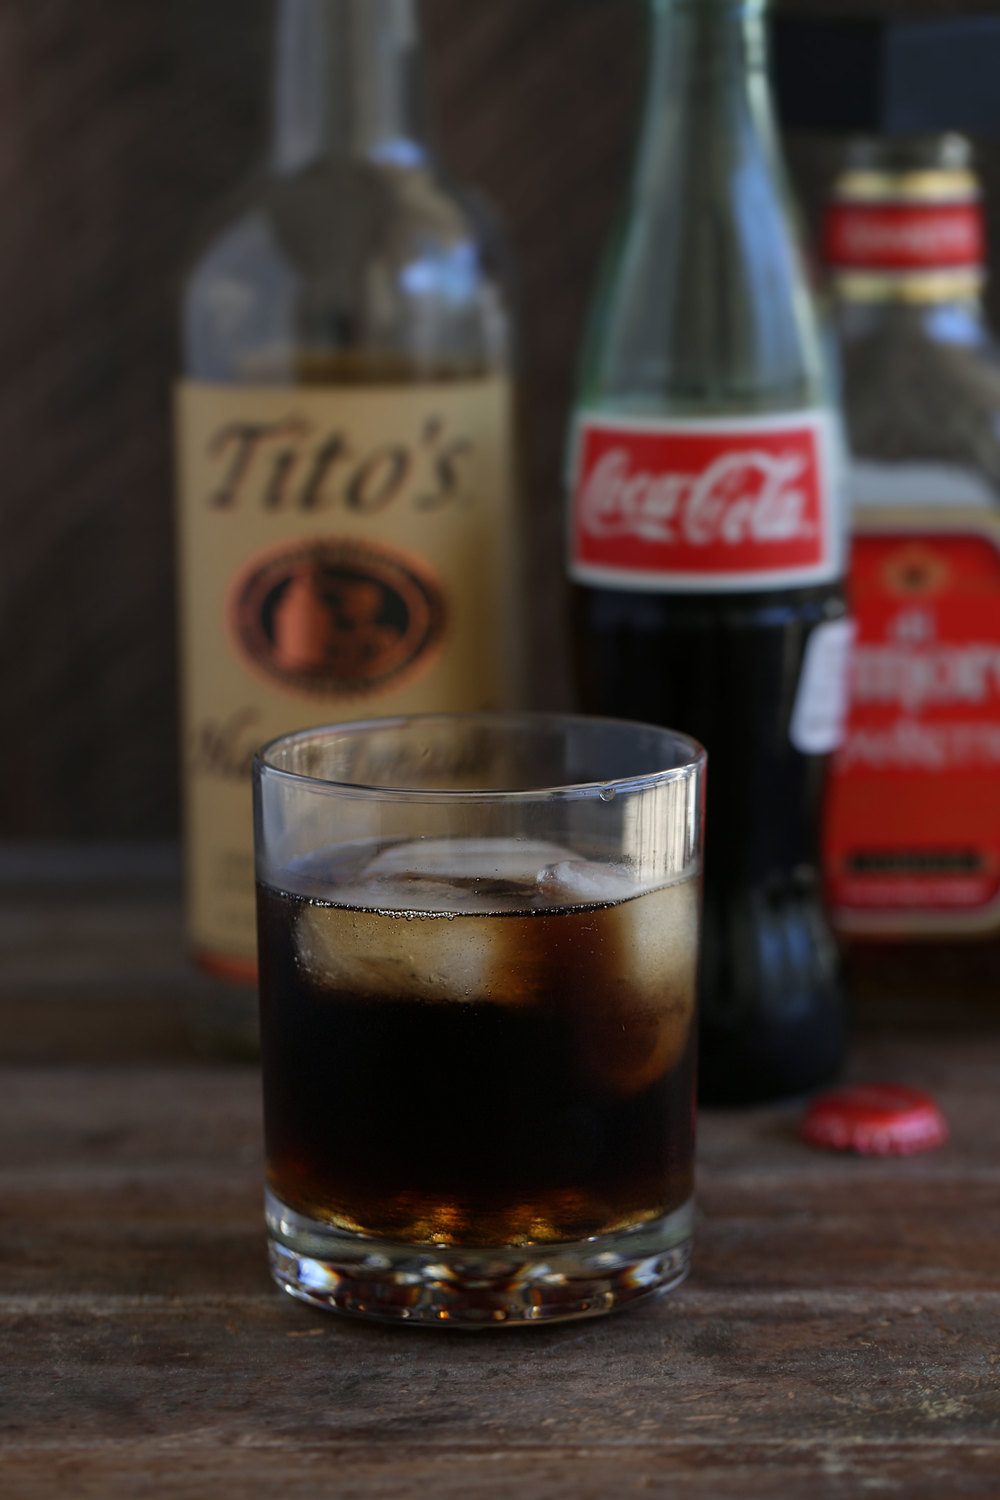 DP shootout made with vodka, coca cola and amaretto in a lowball glass